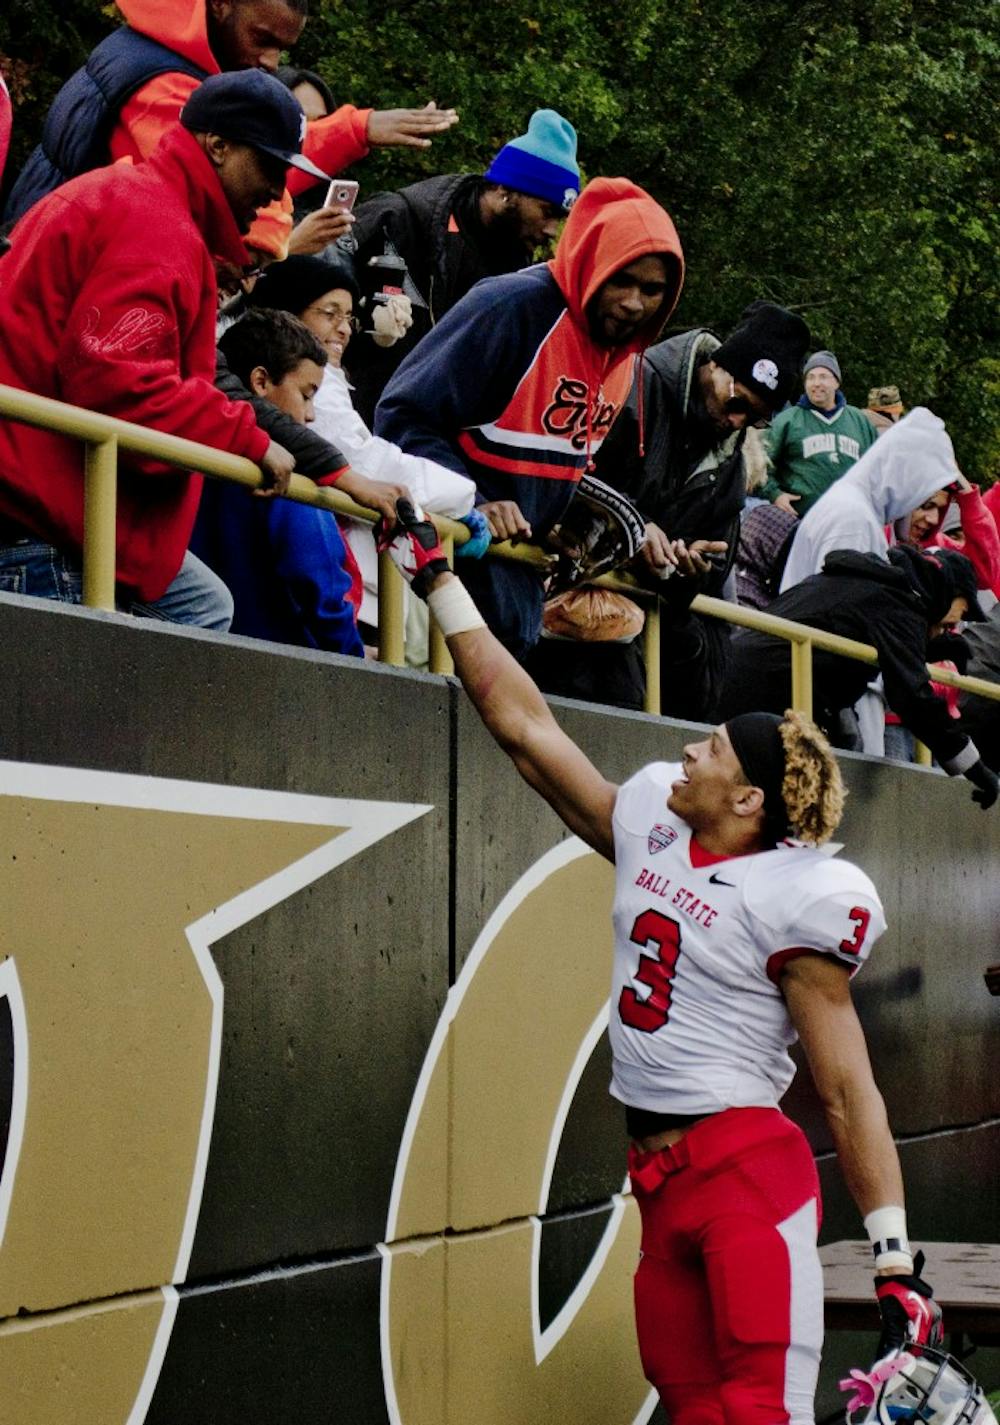 Junior Willie Snead shakes hands with members of the crowd after winning the game against Western Michigan University on Oct. 19 at Waldo Stadium. Ball State won 38-17. DN PHOTO BREANNA DAUGHERTY 